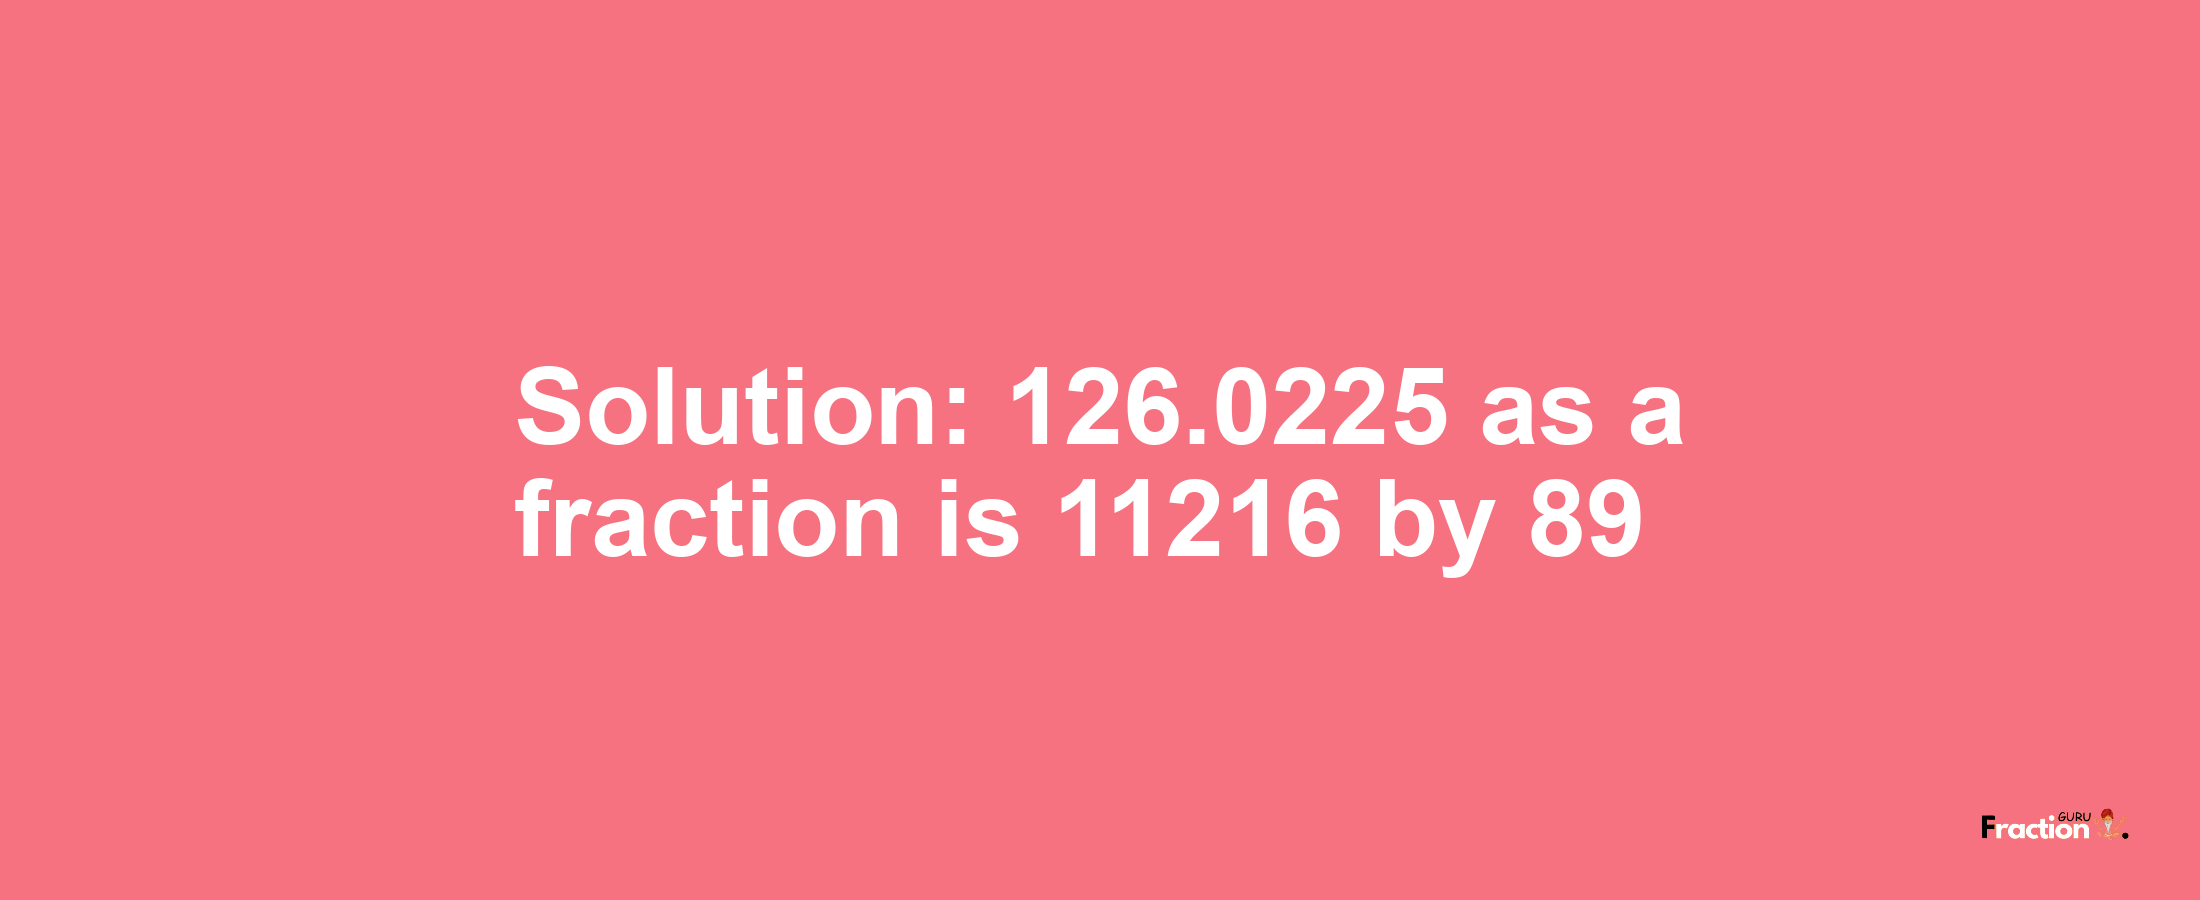 Solution:126.0225 as a fraction is 11216/89